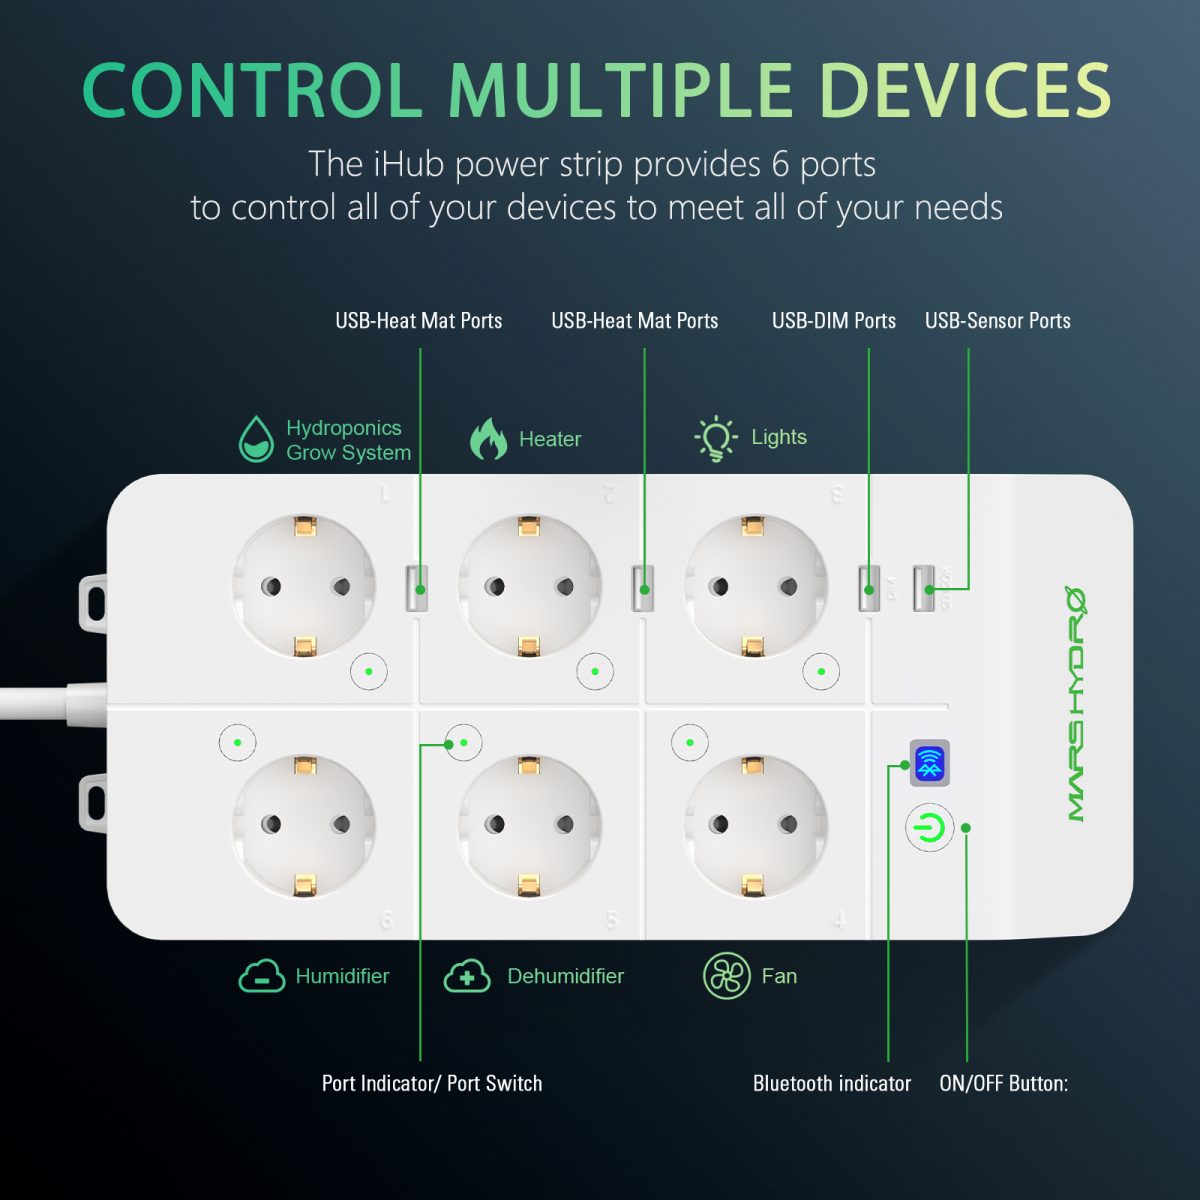 The iHub smart power strip has a built-in 16A overcurrent fuse that will cut off power and notify you via the APP in case of overload. Together with the outlet safety doors, this power strip provides protection from sudden electric shock when plugged in.